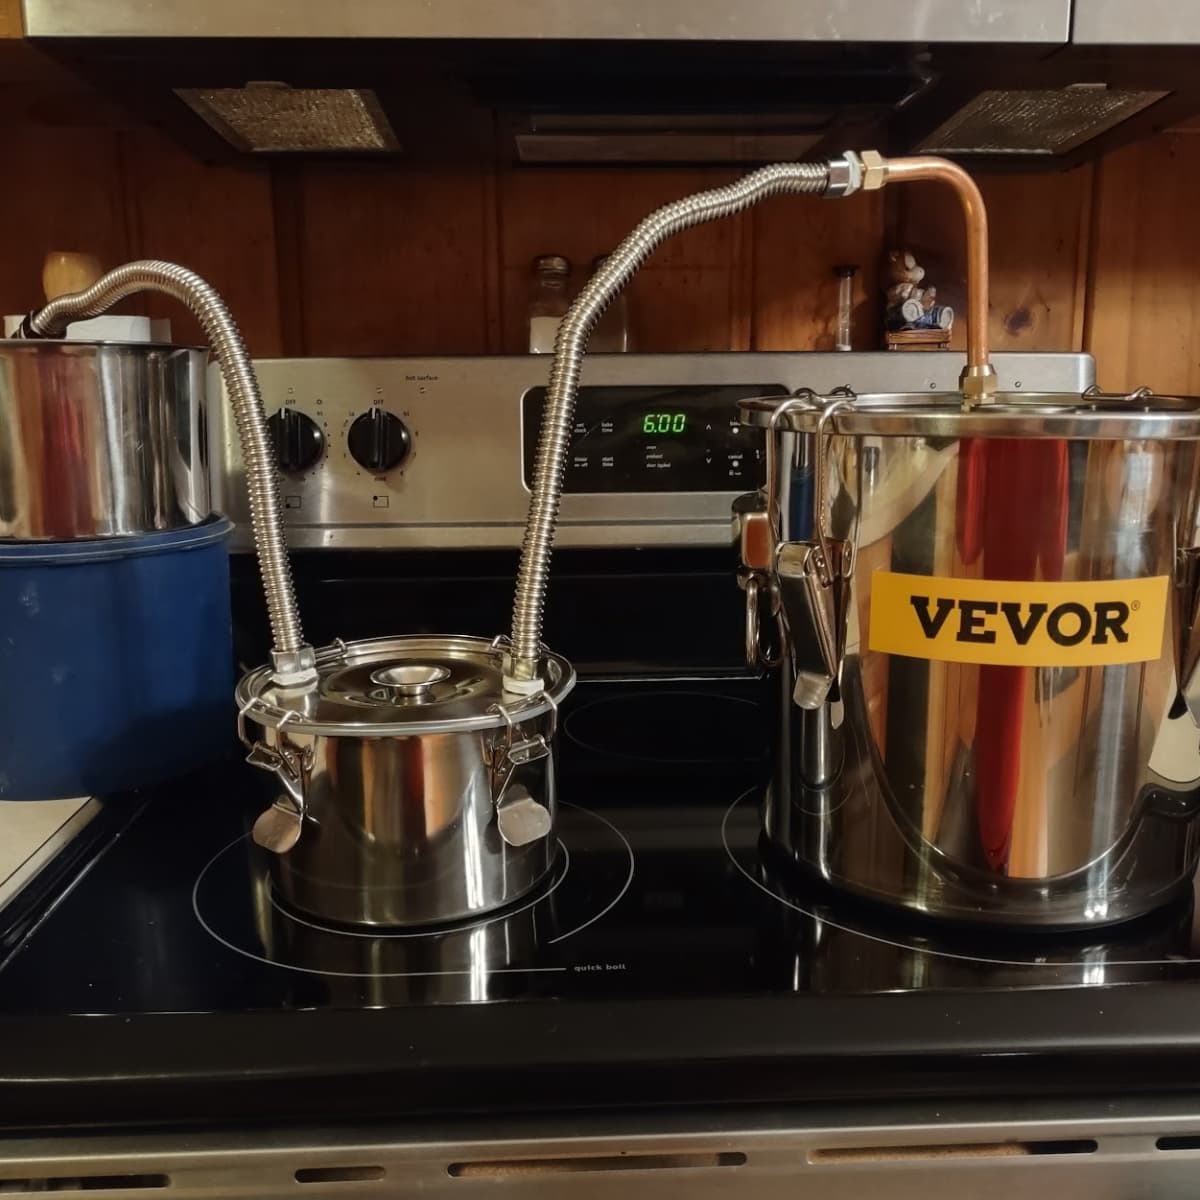 Review of the Vevor Still: Pros and Cons - Delishably